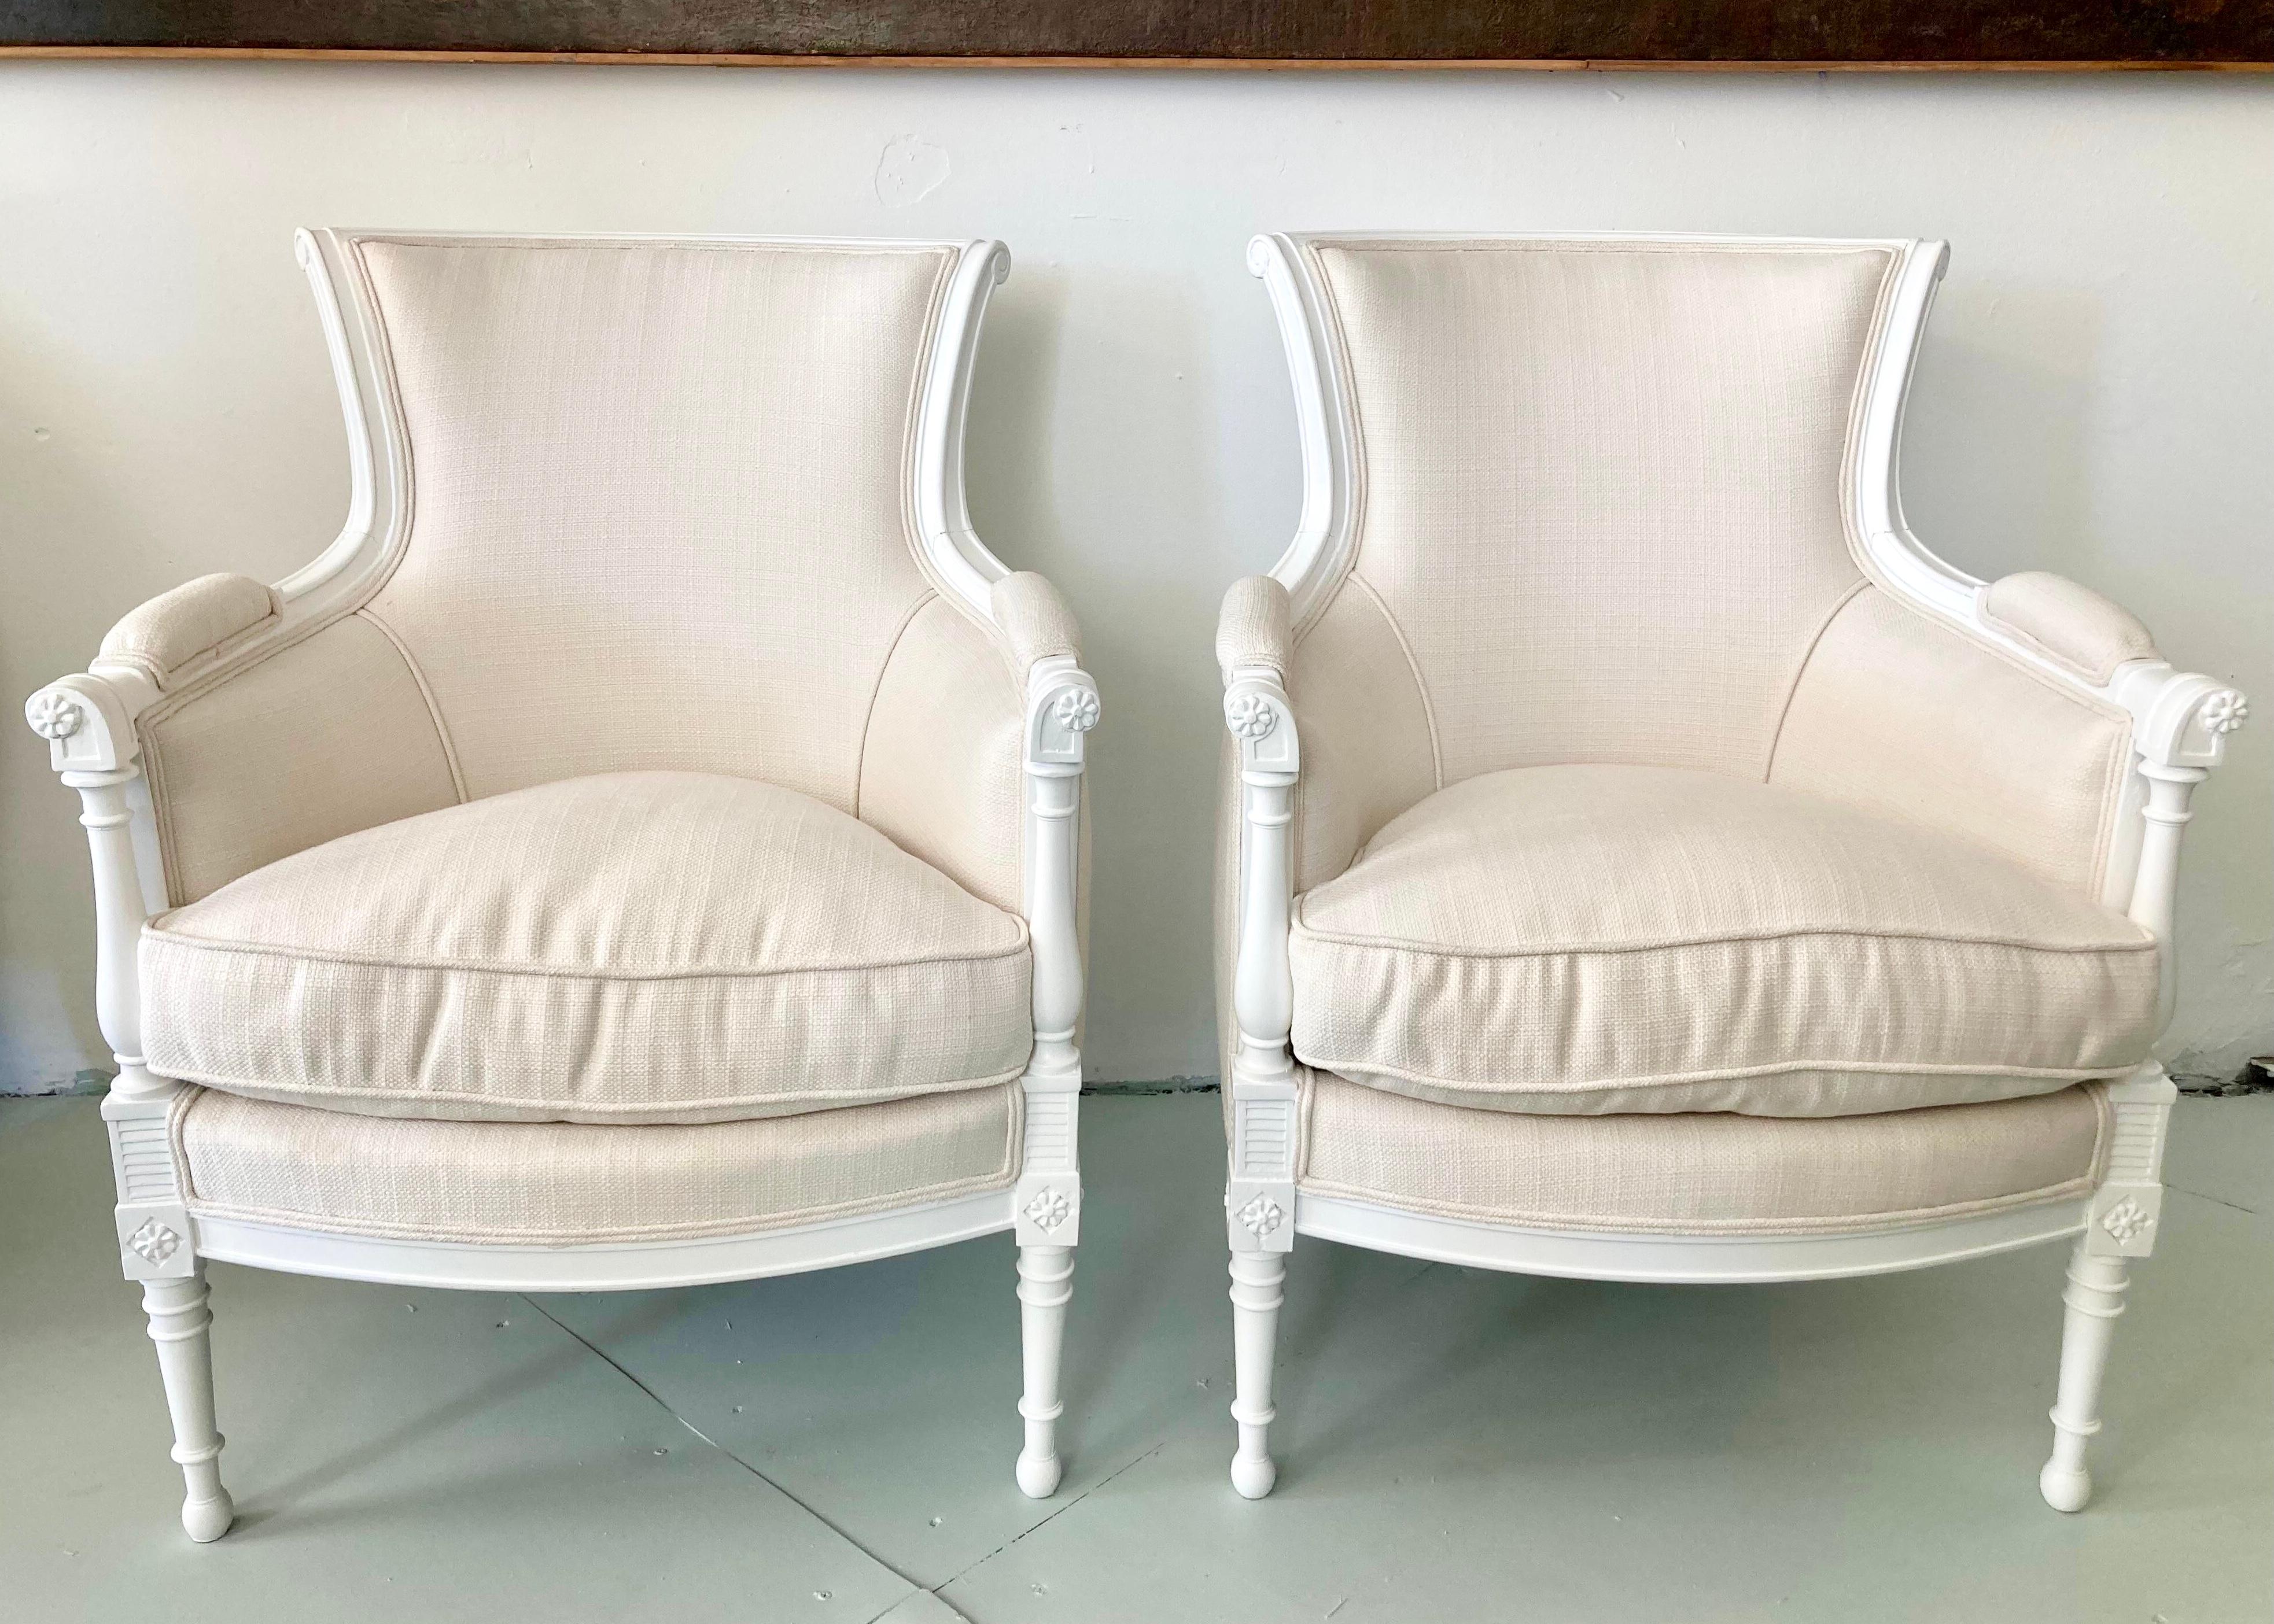 Fabulous pair of French directoire Bergere chair freshly lacquered in white finish. New Todd Hase upholstery. New Todd Hase Hight Performance Off White textiles .Add some French Style and architecture to your eclectic interiors.